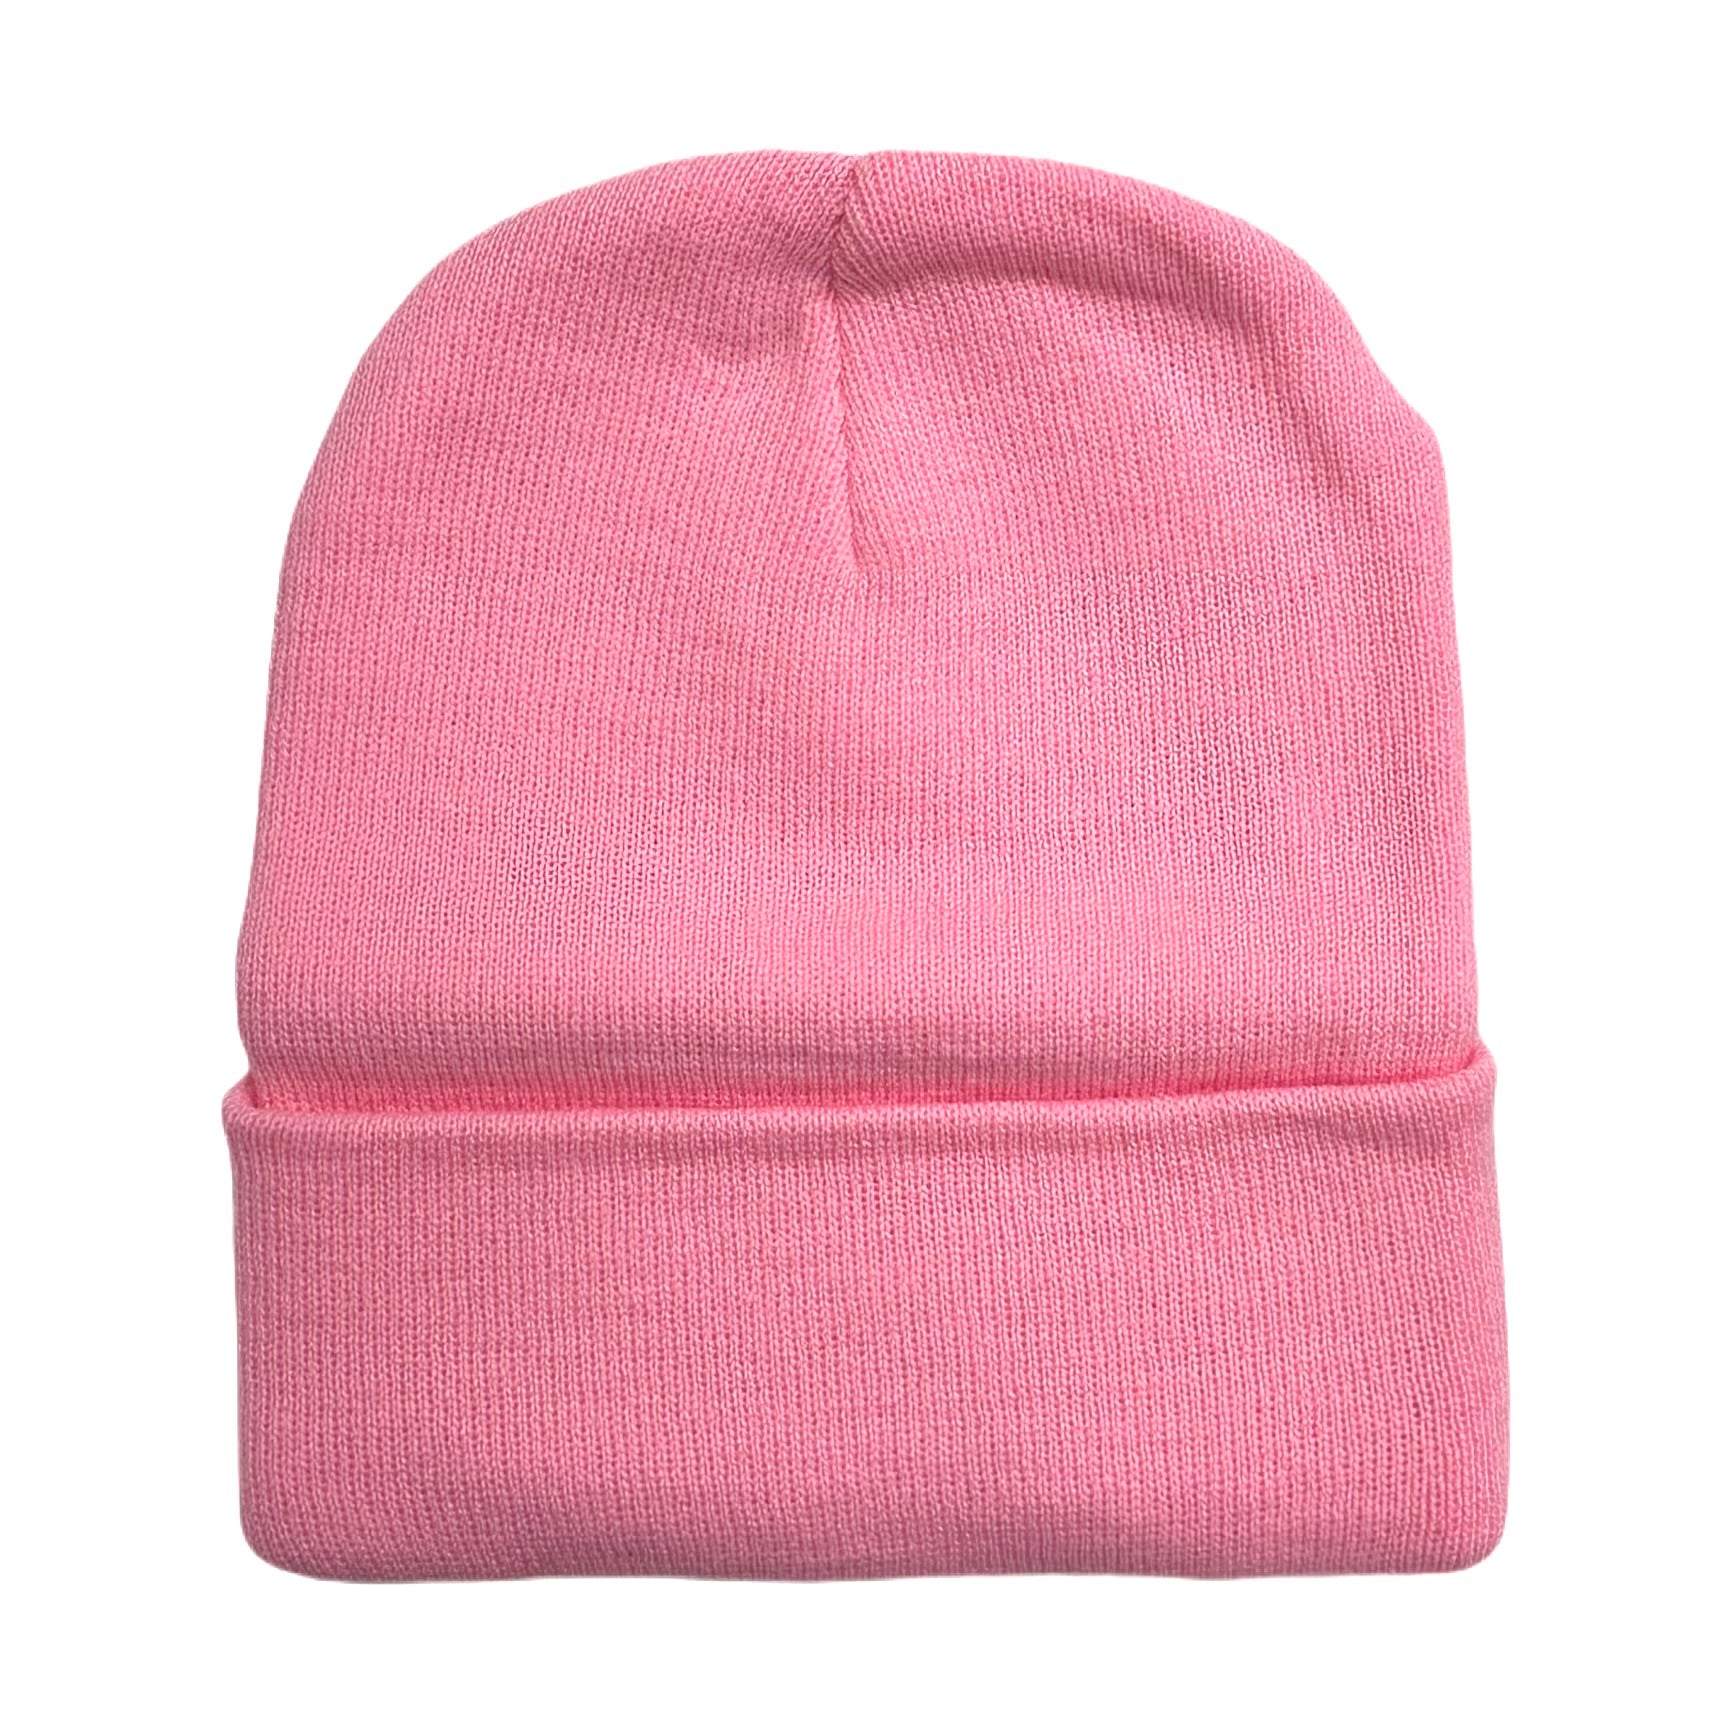 TFashion Solid Color Beanies (Red/Burgundy/Baby Pink/Pink)